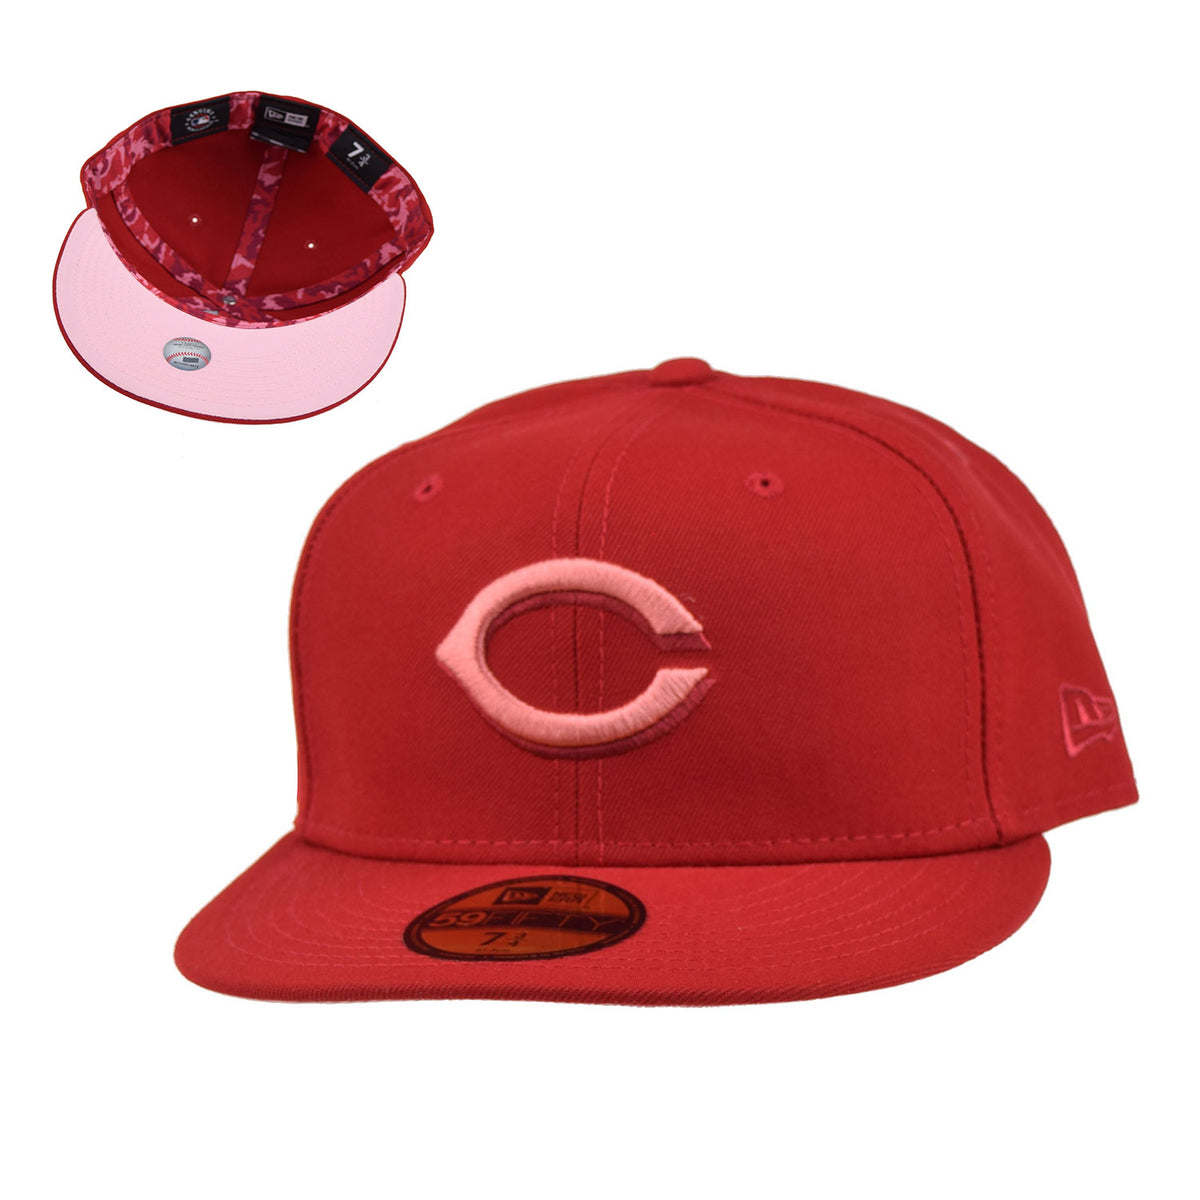 New Era Cincinnati Reds 59FIFTY Authentic Collection Hat Black/Red 7 3/8